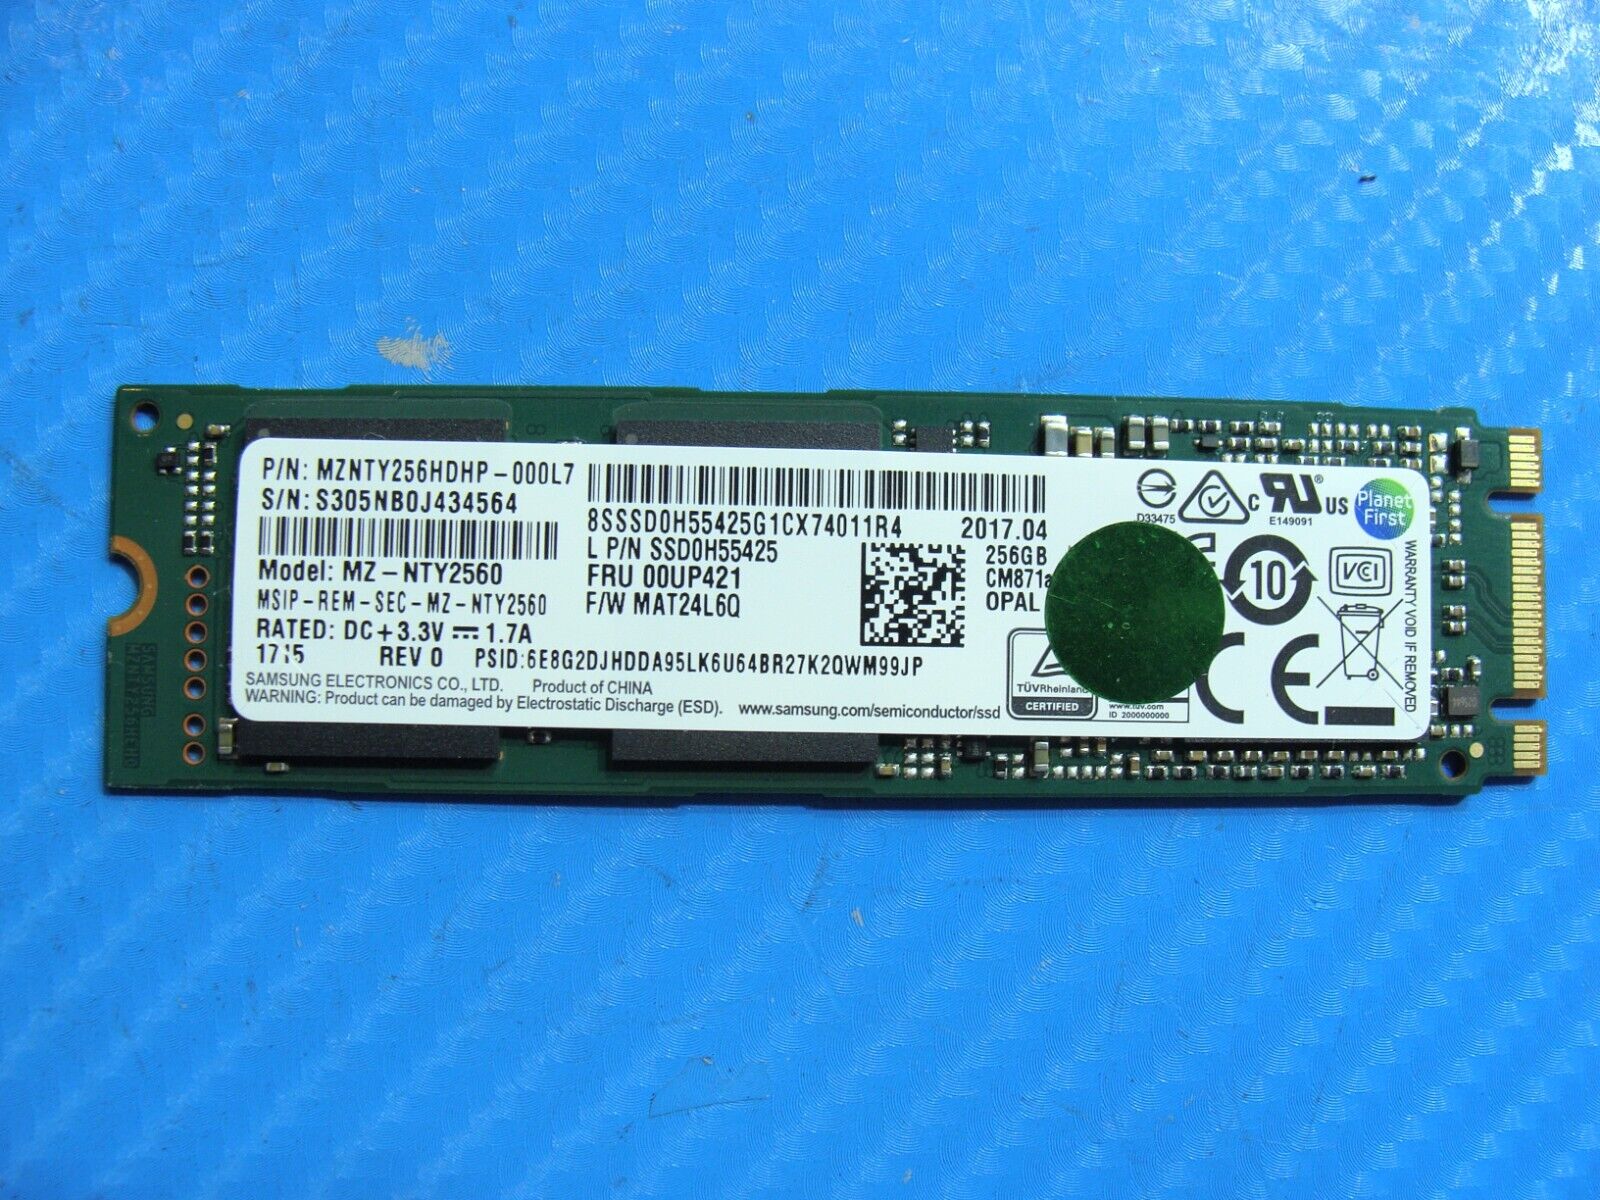 MacBook Air A1466 SanDisk 256GB SSD Solid State Drive 661-7461 655